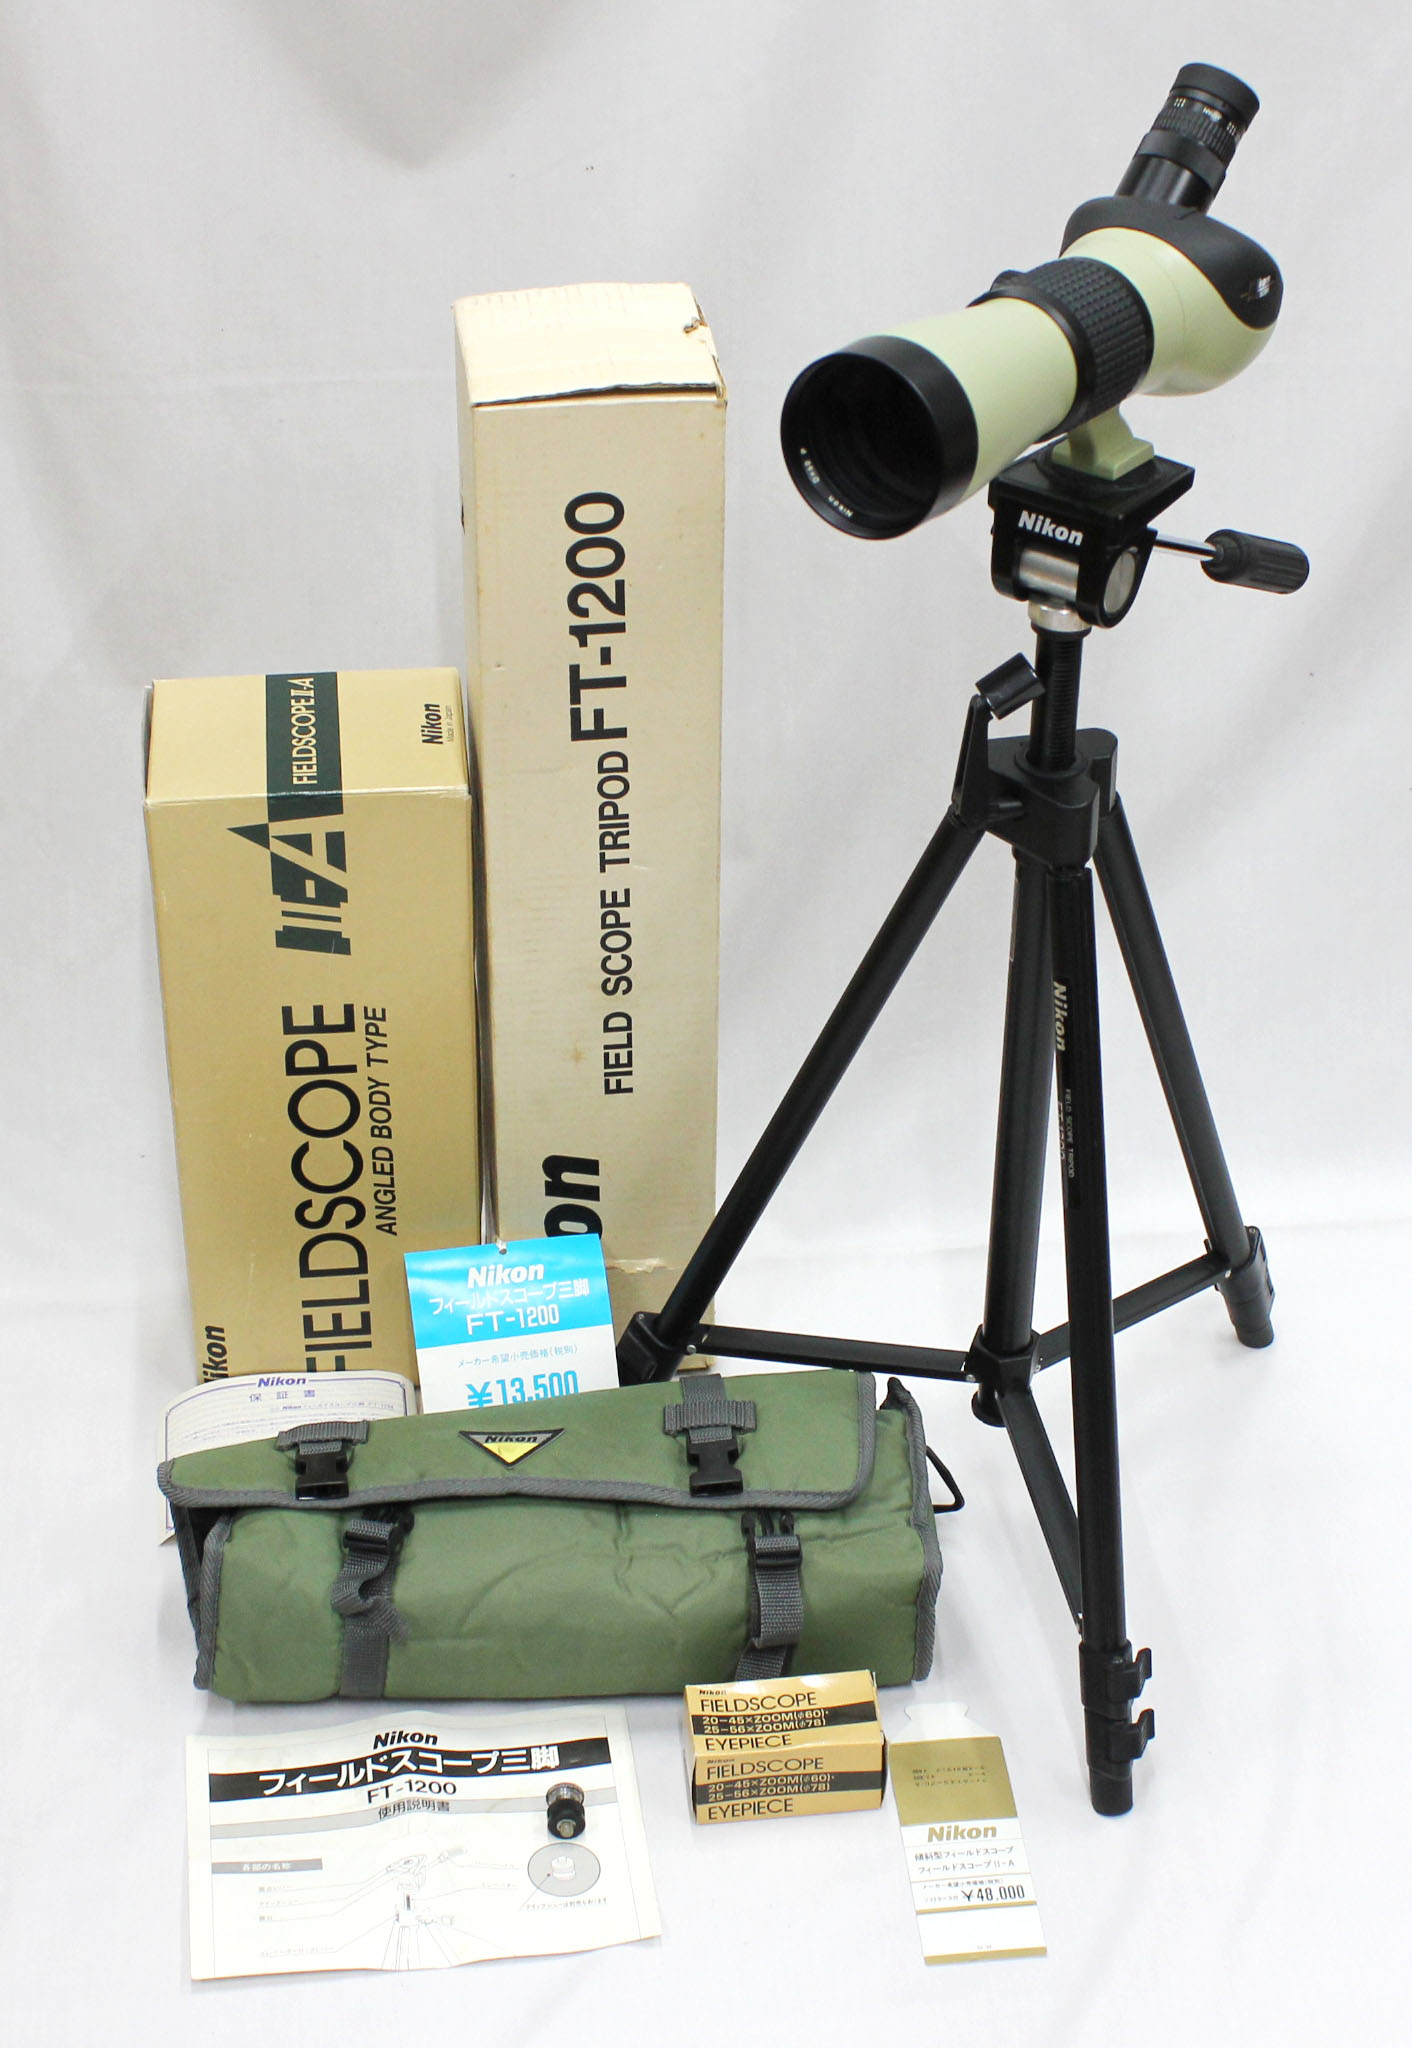 Japan Used Camera Shop | Nikon Fieldscope D=60 P II-A Angled Body Type with 20-45X Eye Piece and FT-1200 Tripod from Japan